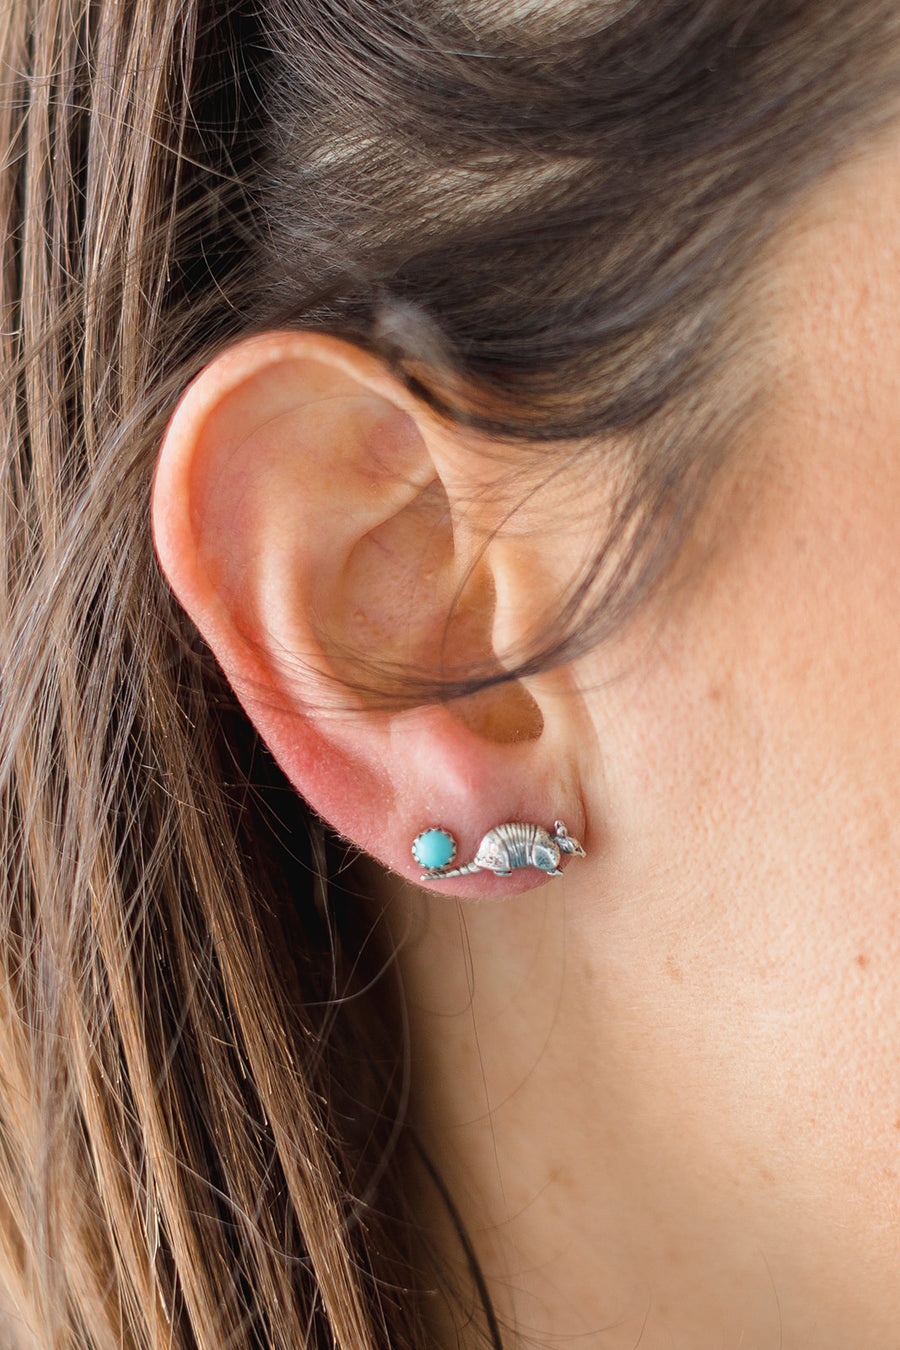 The Tiny Turquoise Studs